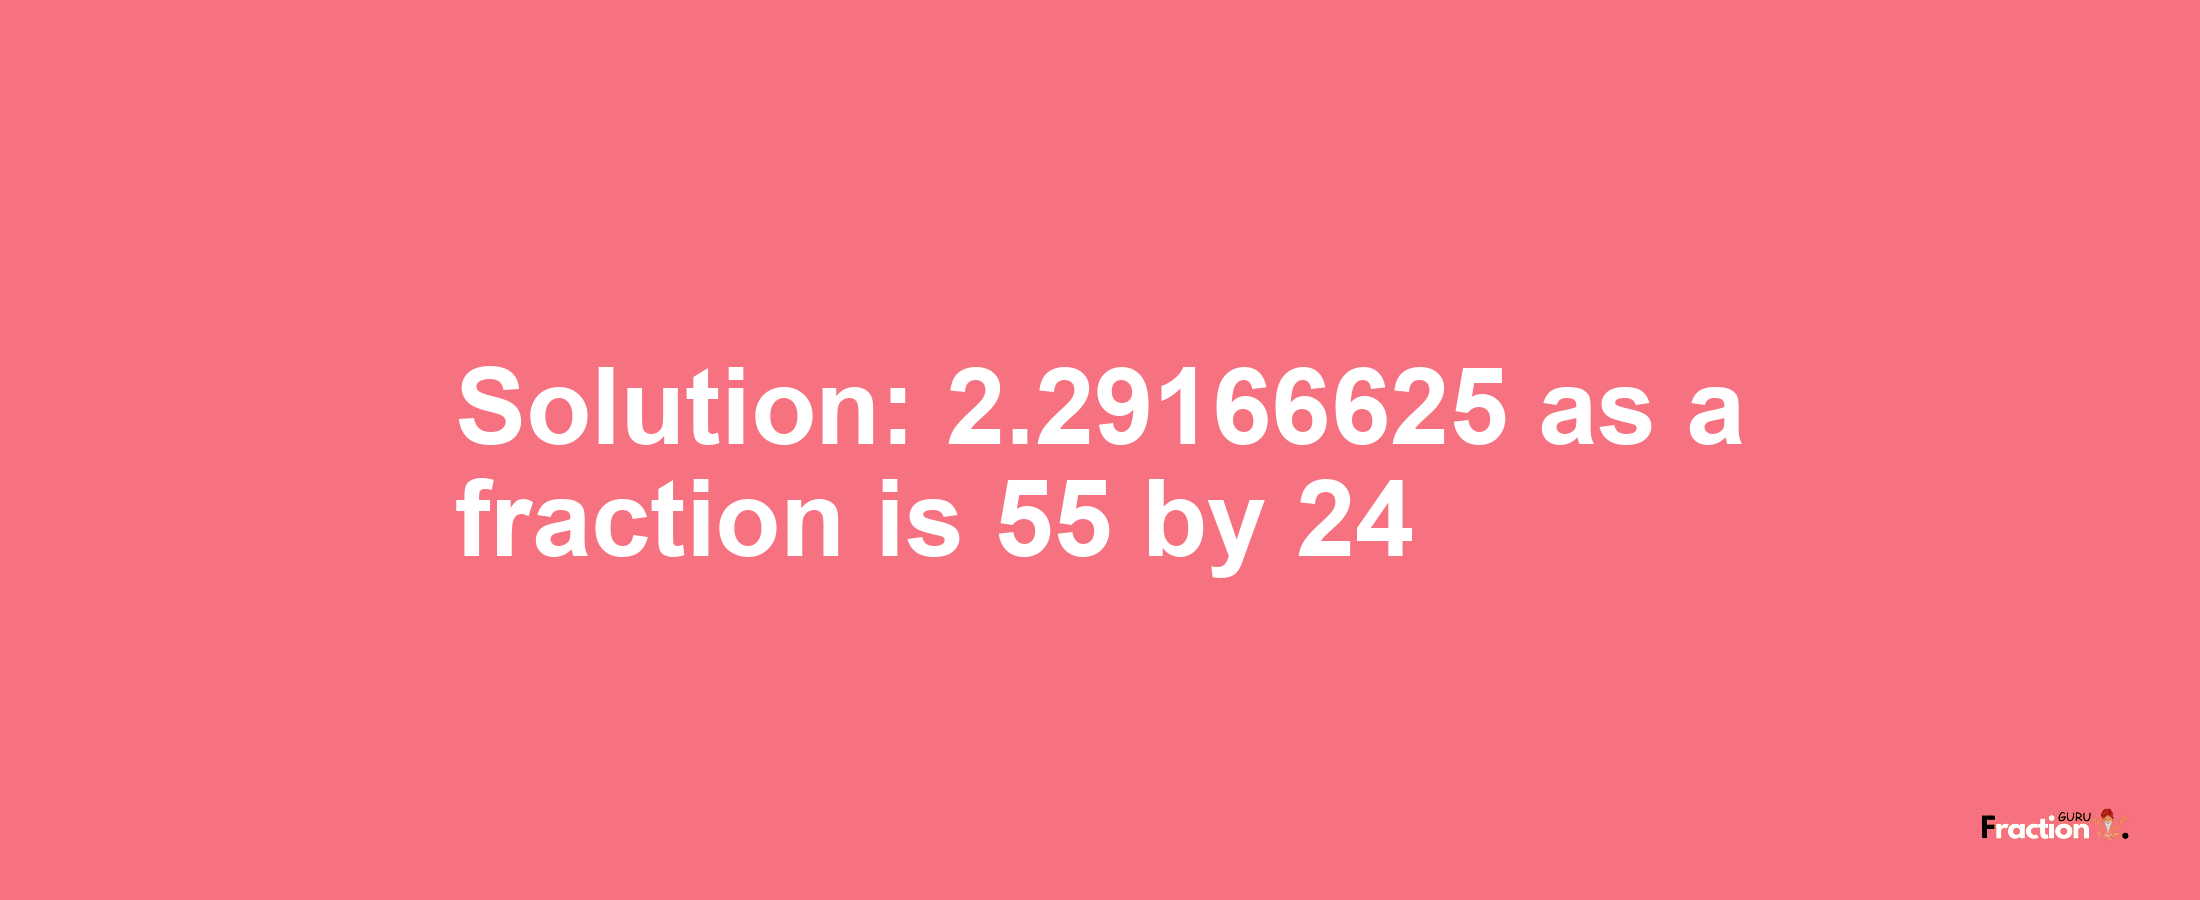 Solution:2.29166625 as a fraction is 55/24